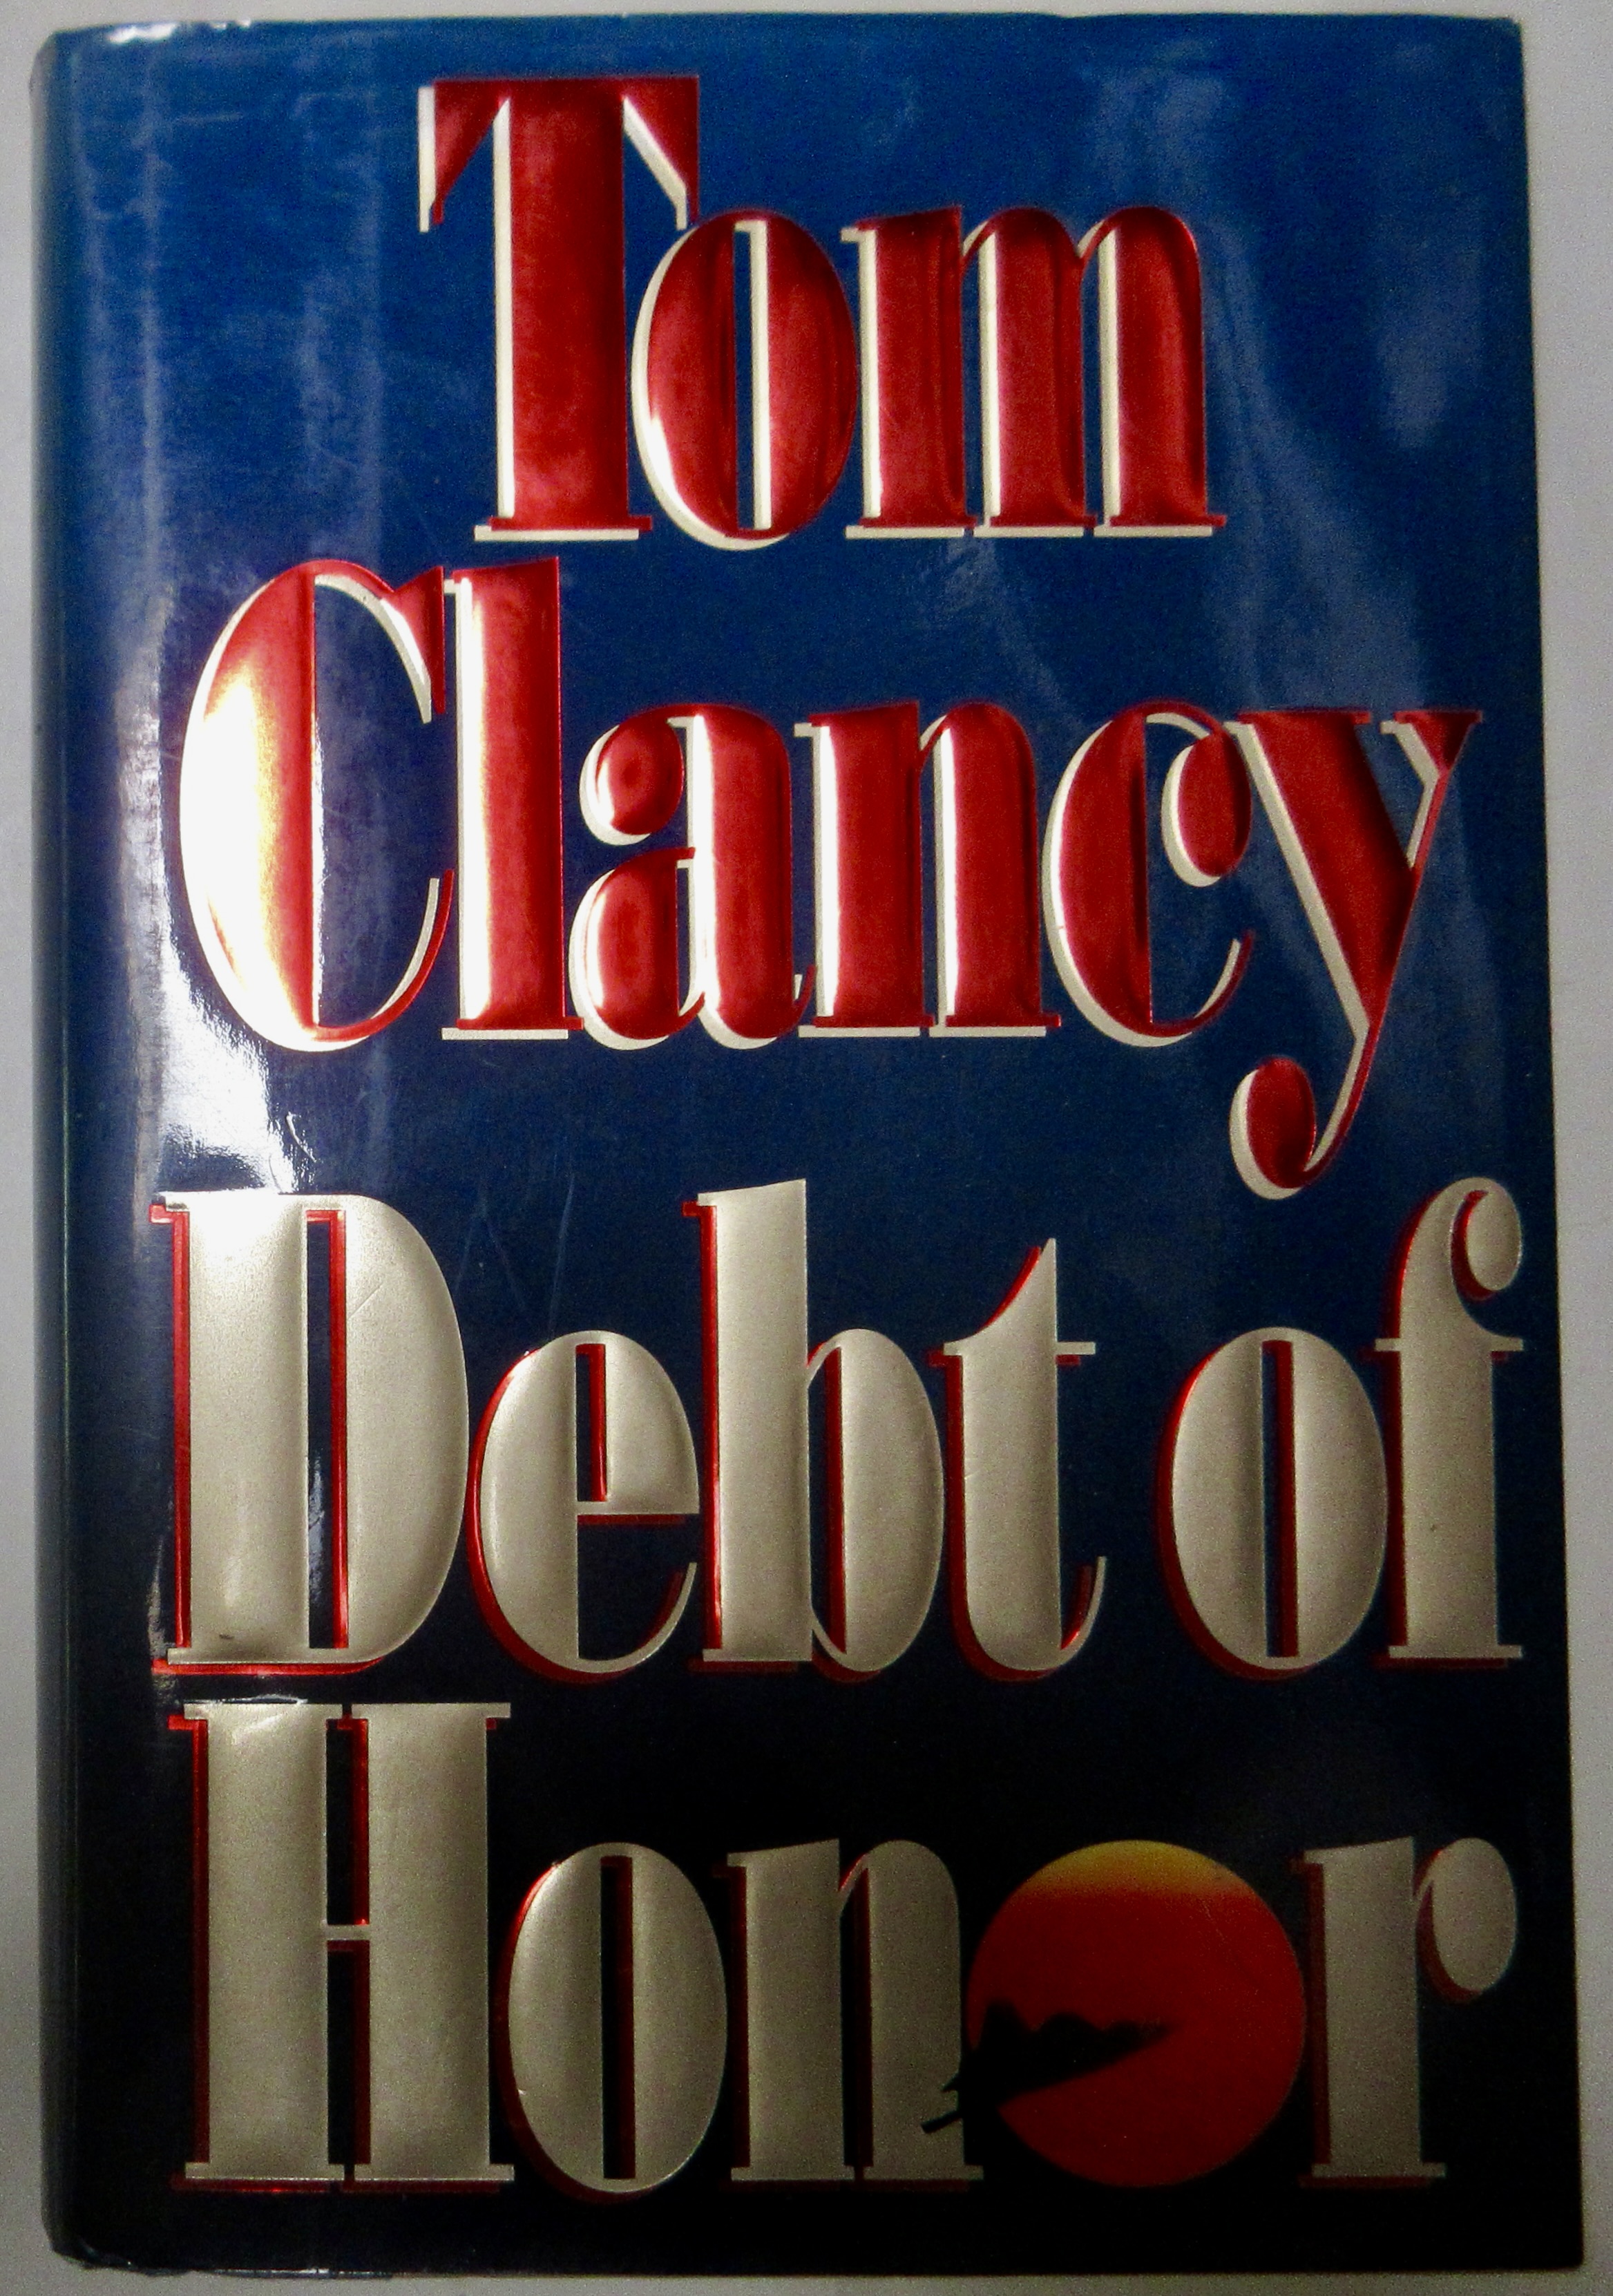 Debt of Honor  Tom Clancy  First Edition~P77654024